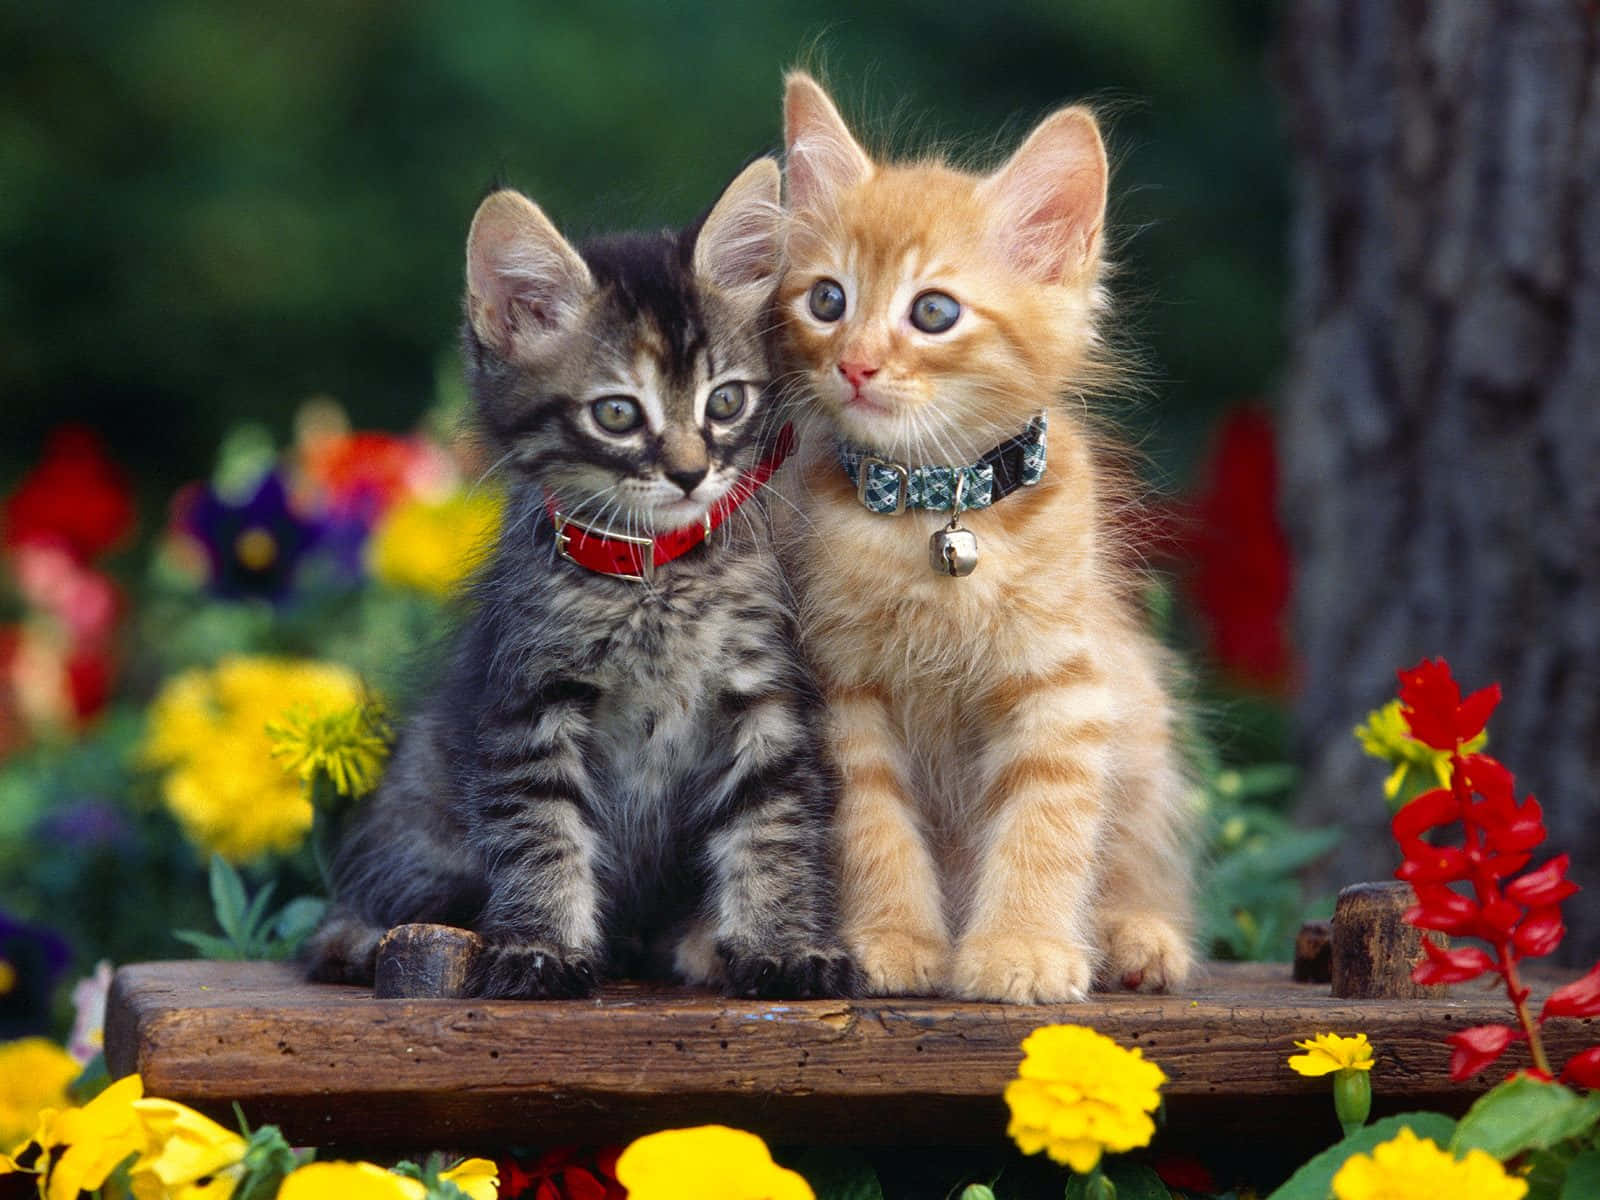 Cute Cats And Flowers Picture